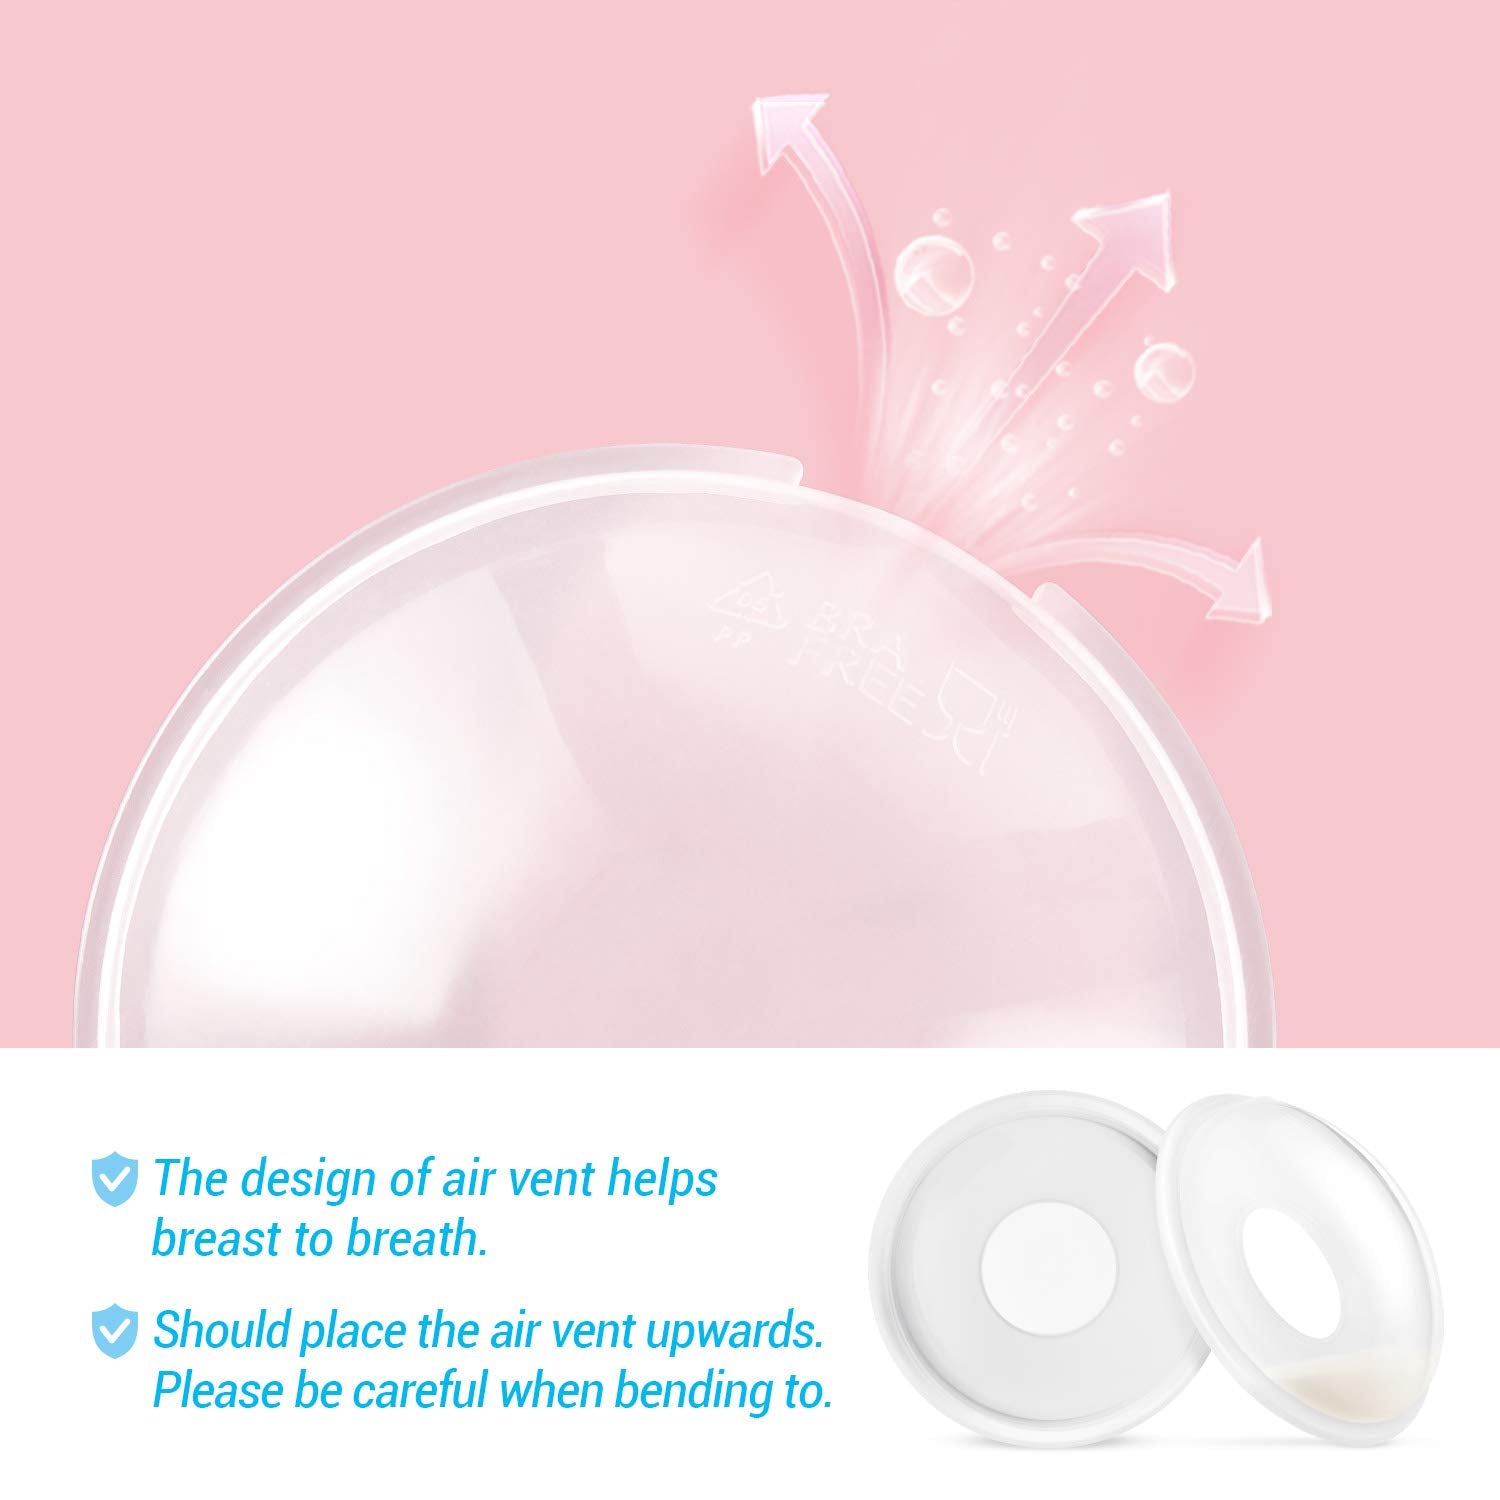 Breast Shells Milk Saver for Breastfeeding, 2 Pack BPA Free Breast Shield  Nursing Cups Protect Sore Nipples Breast Milk Collection Shells